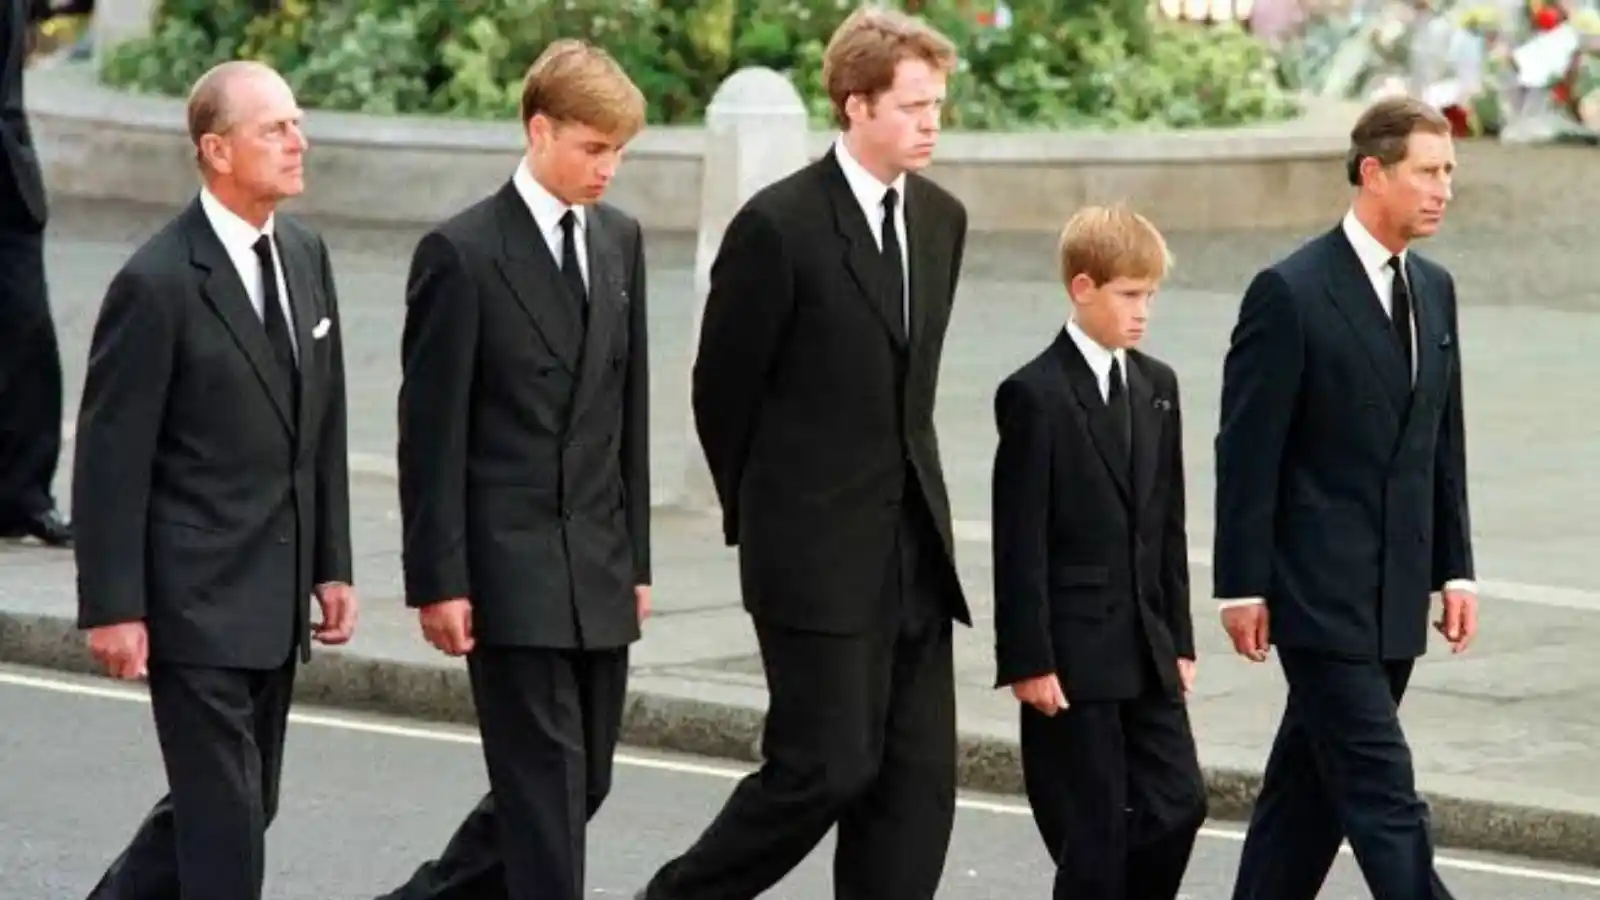 Prince Harry with the males of the family during Princess Diana's funeral